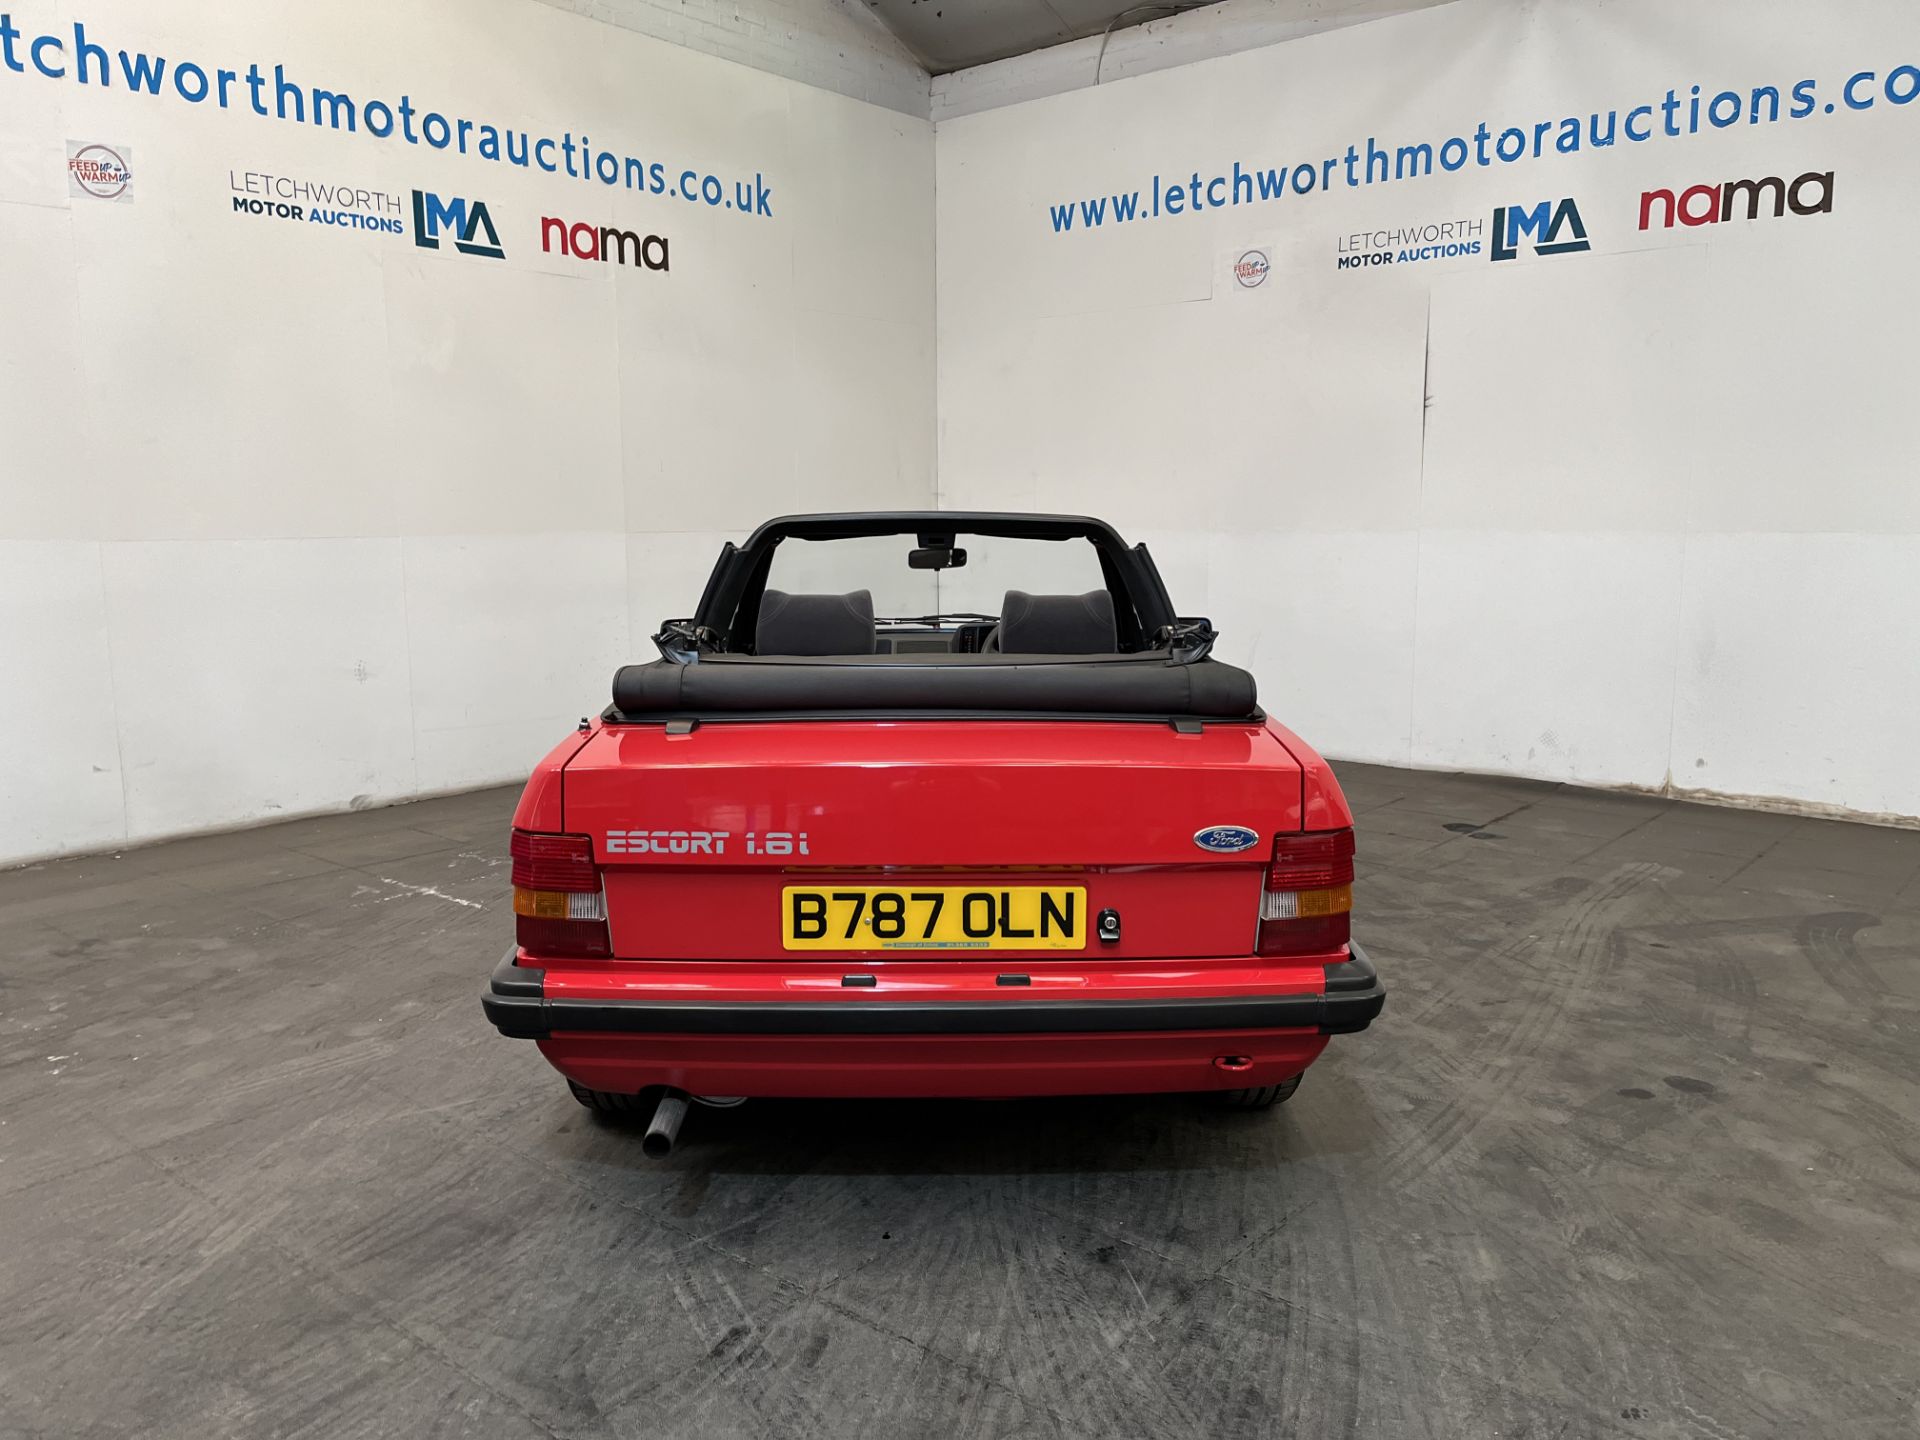 1985 Ford Escort 1.6i Cabriolet - 1597cc *ONE OWNER FROM NEW* - Image 10 of 24